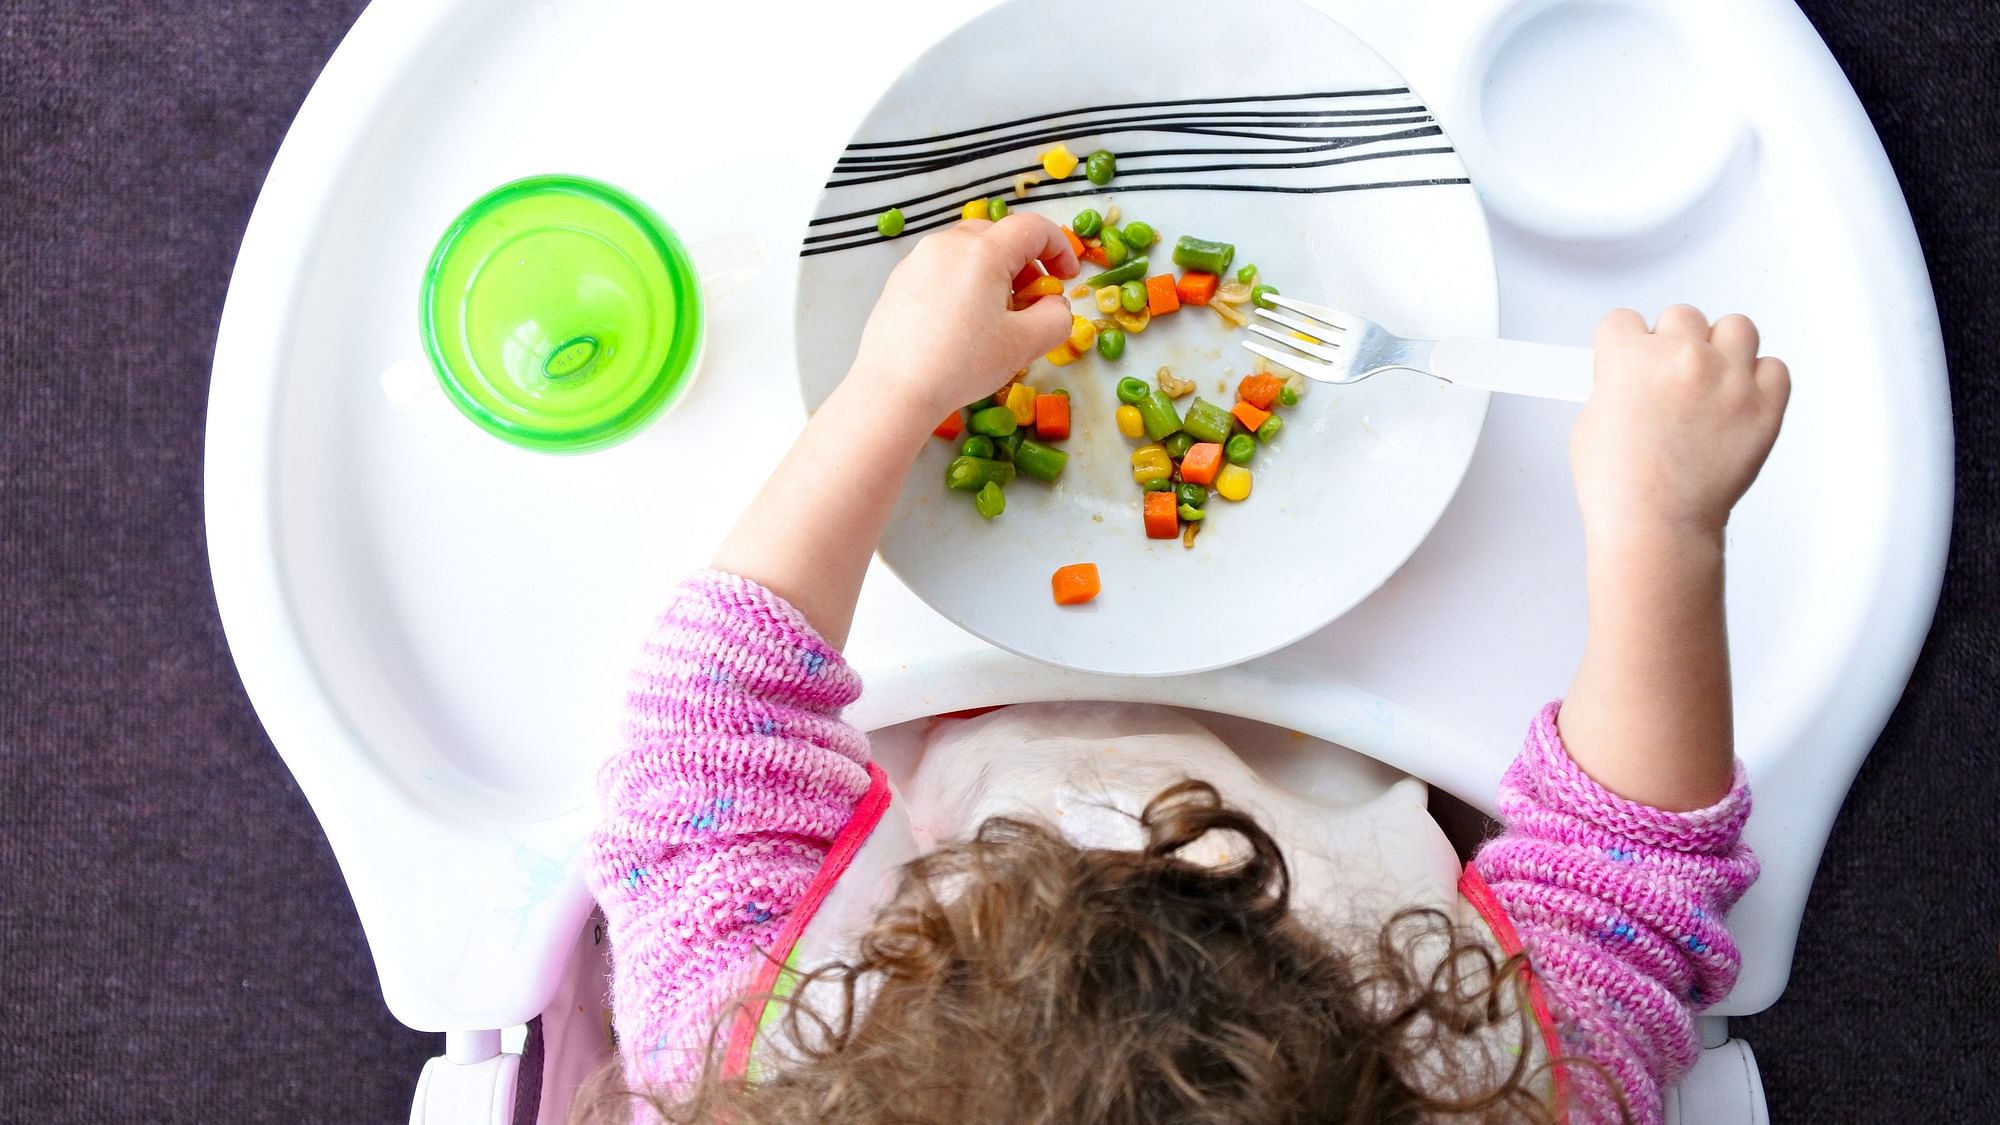 Diets believed to be healthy for grown-ups may not fare so well with kids